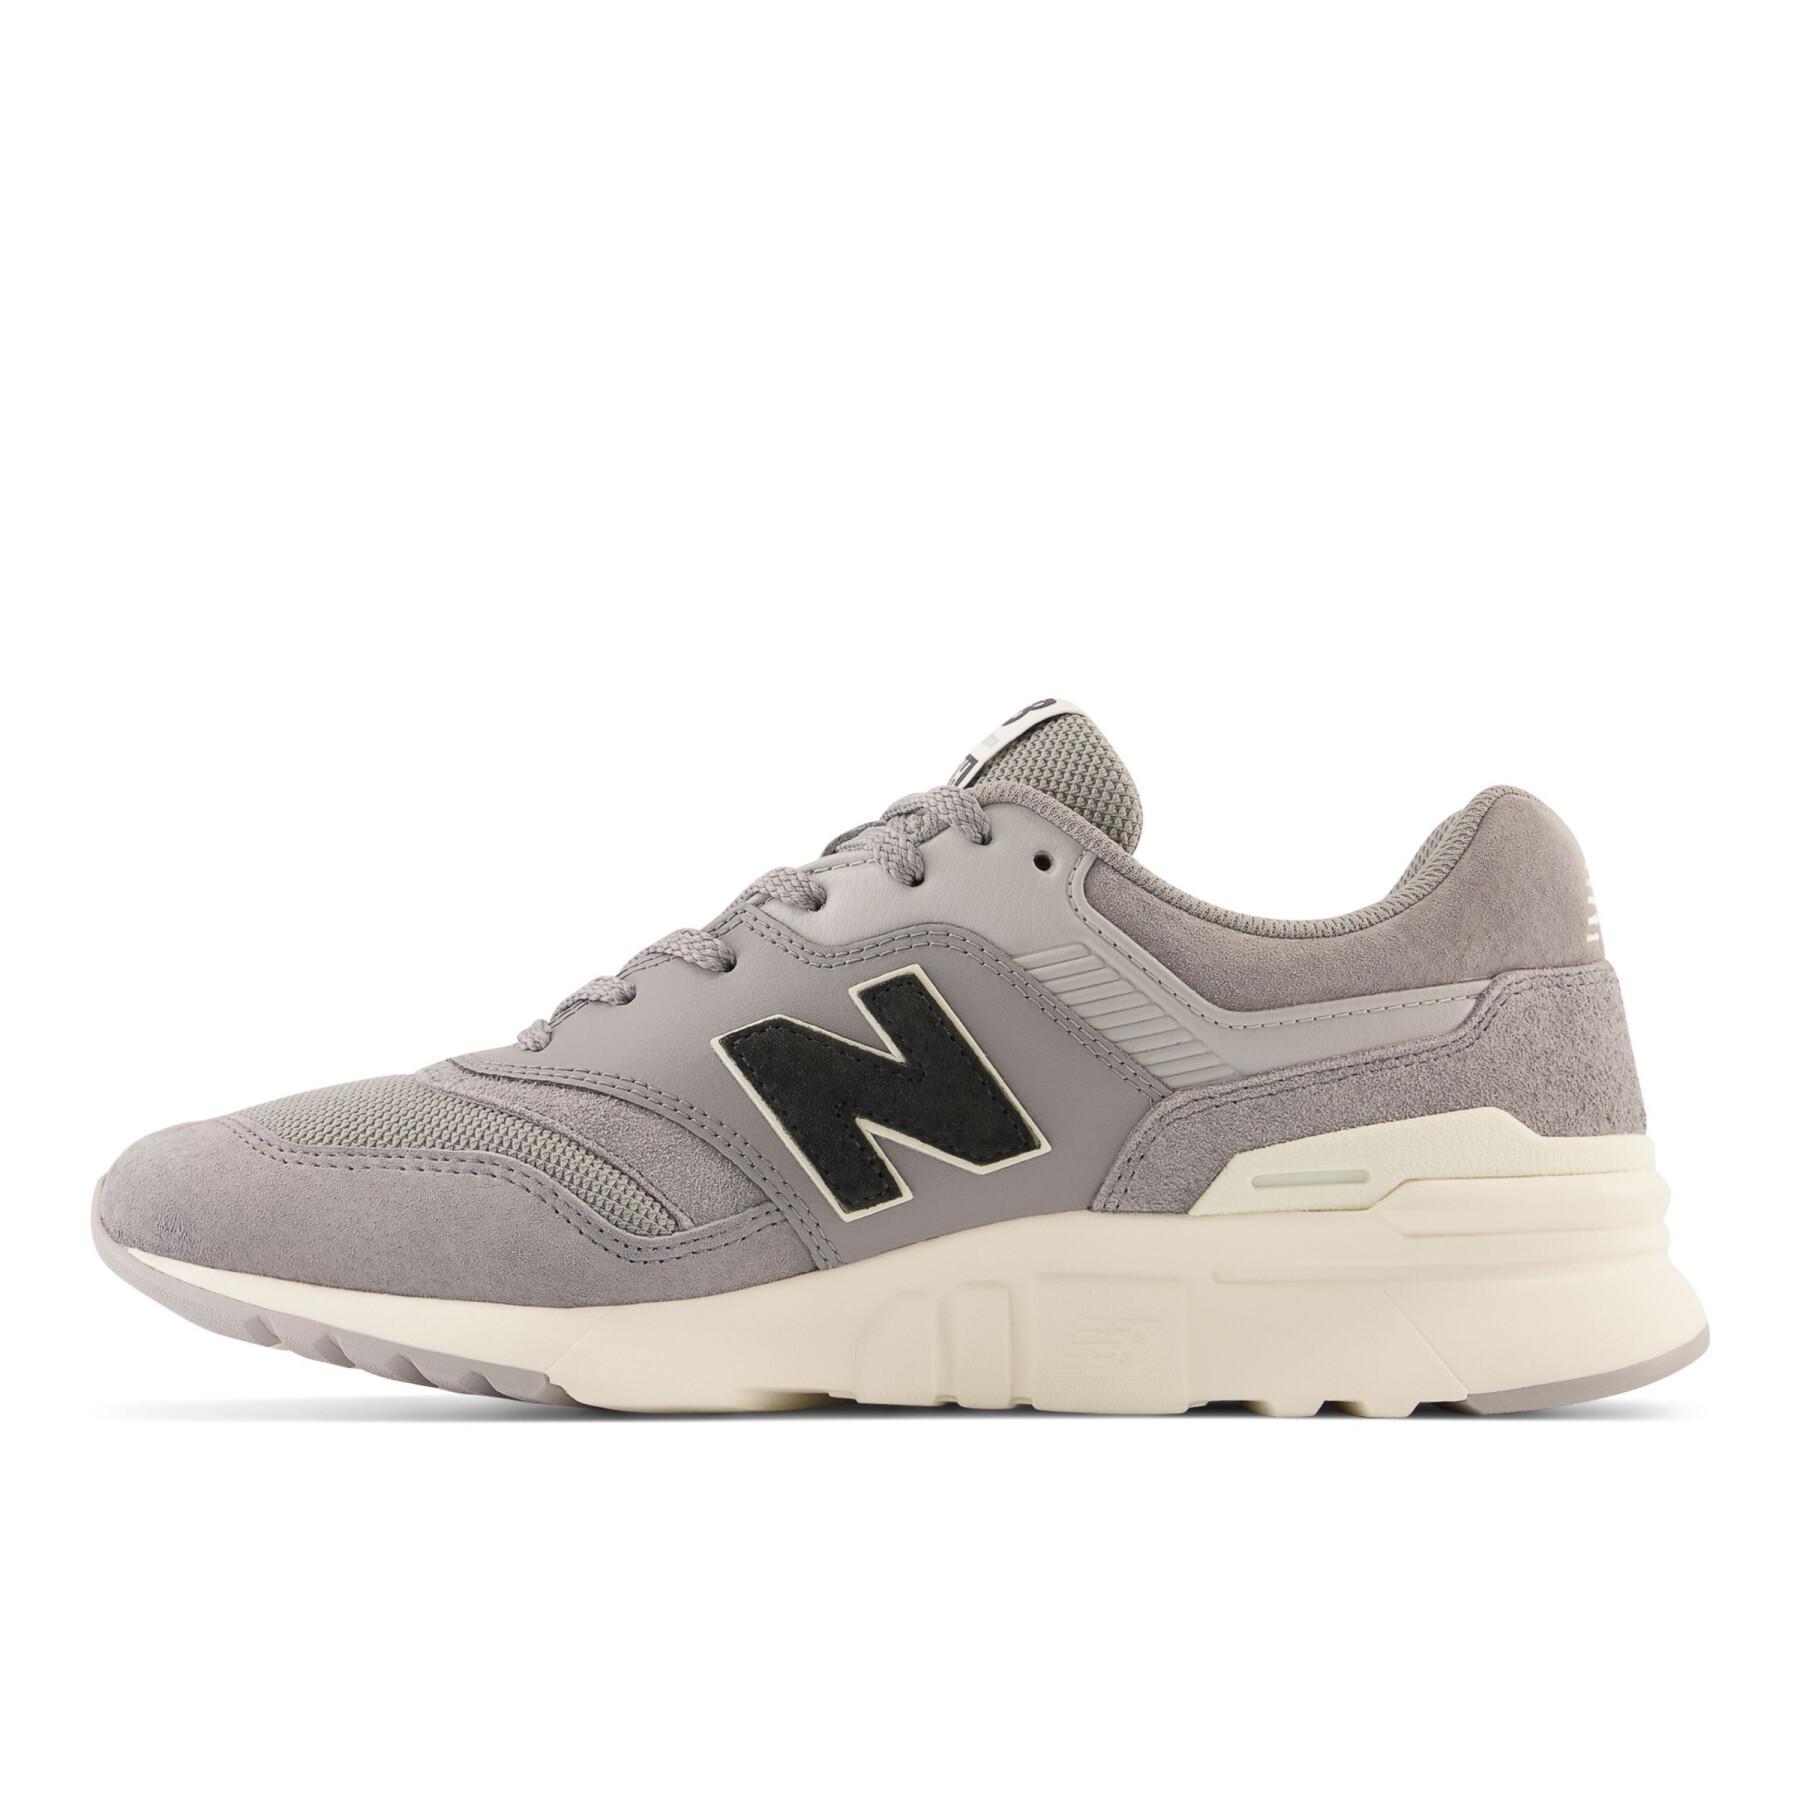 Sneakers New Balance 997